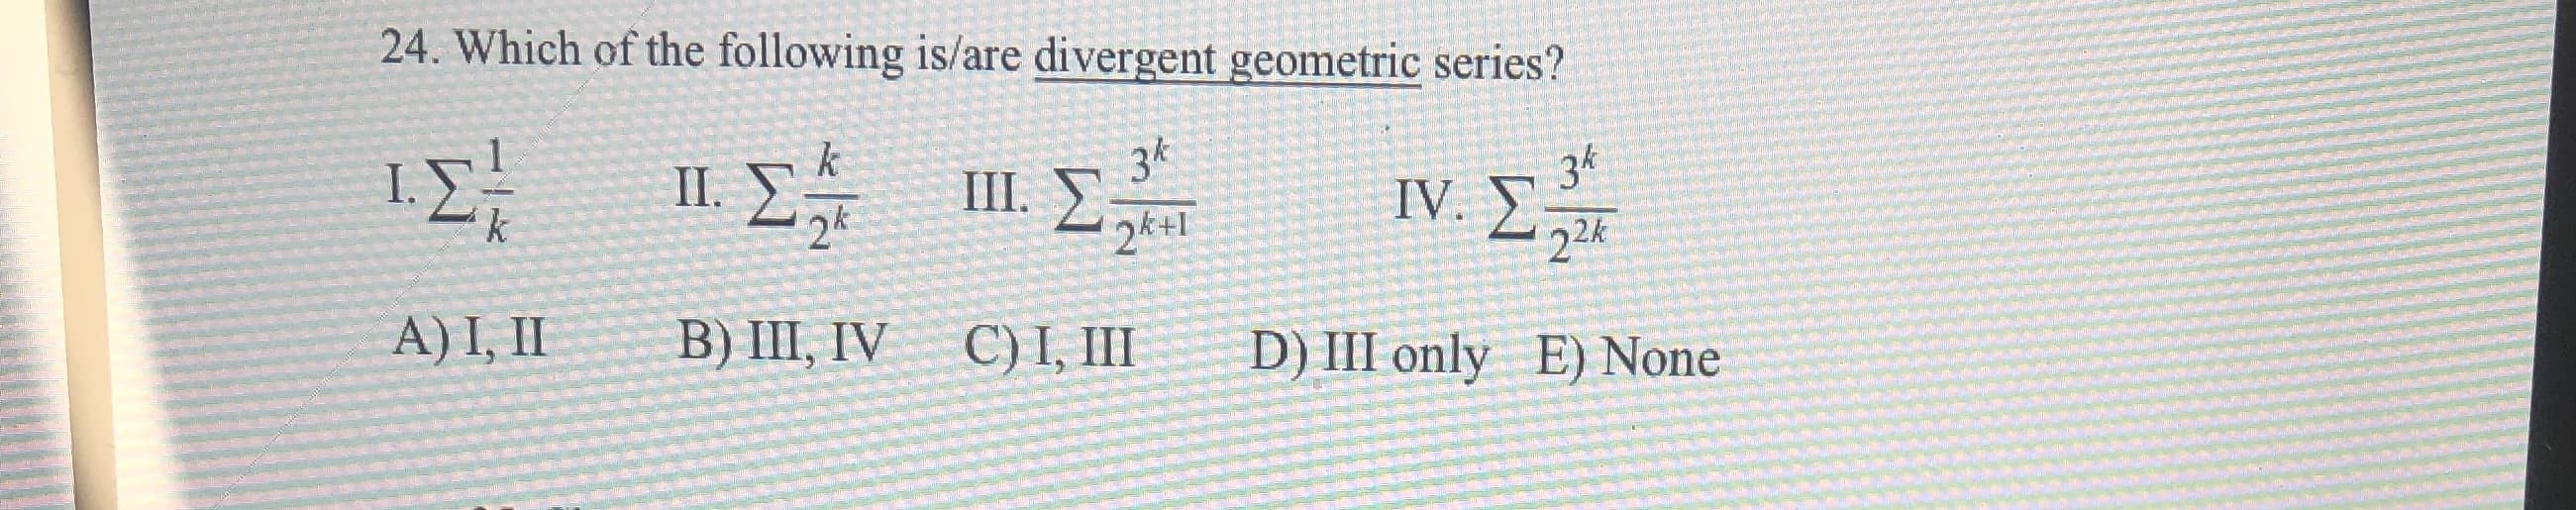 24. Which of the following is/are divergent geometric series?
ΙΣ 1Σ
34
k
36
IV.
Σ
II.
24
III.
2k+I
22K
A) I, II
B) III, IV
C) I, III
D) III only
E) None
